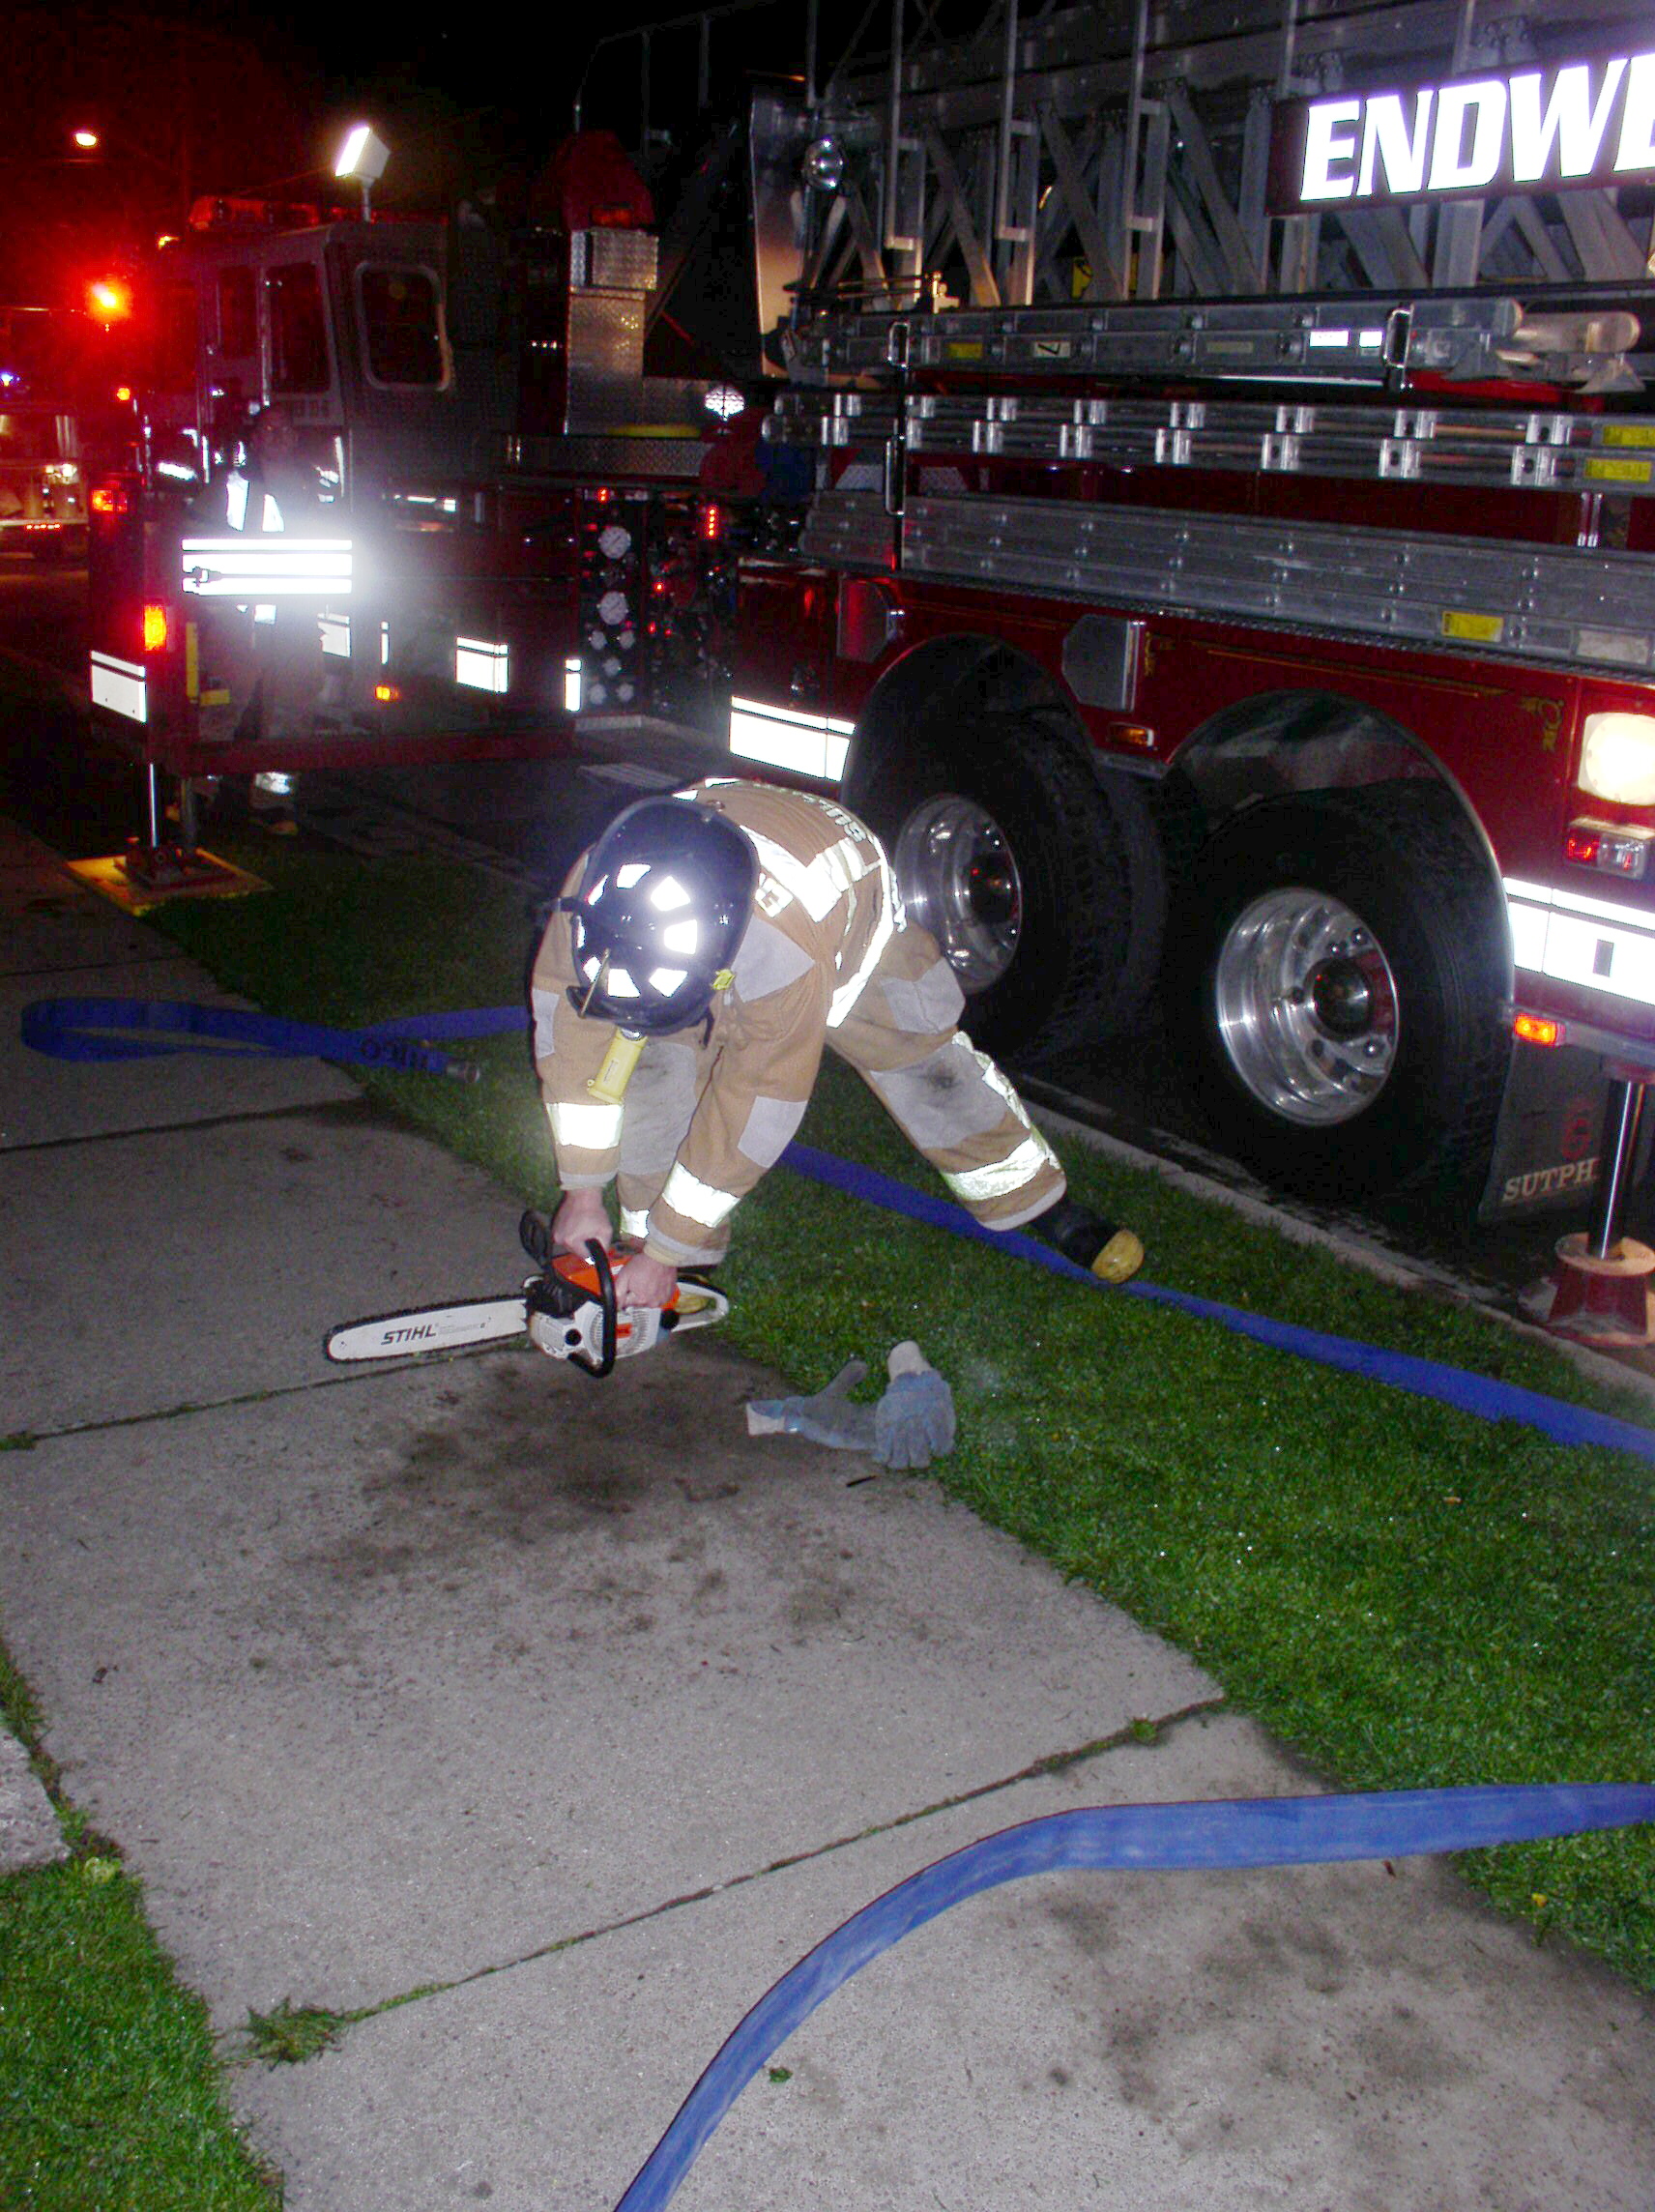 05-04-05  Reponse - Chimeny Fire - Youngs Ave